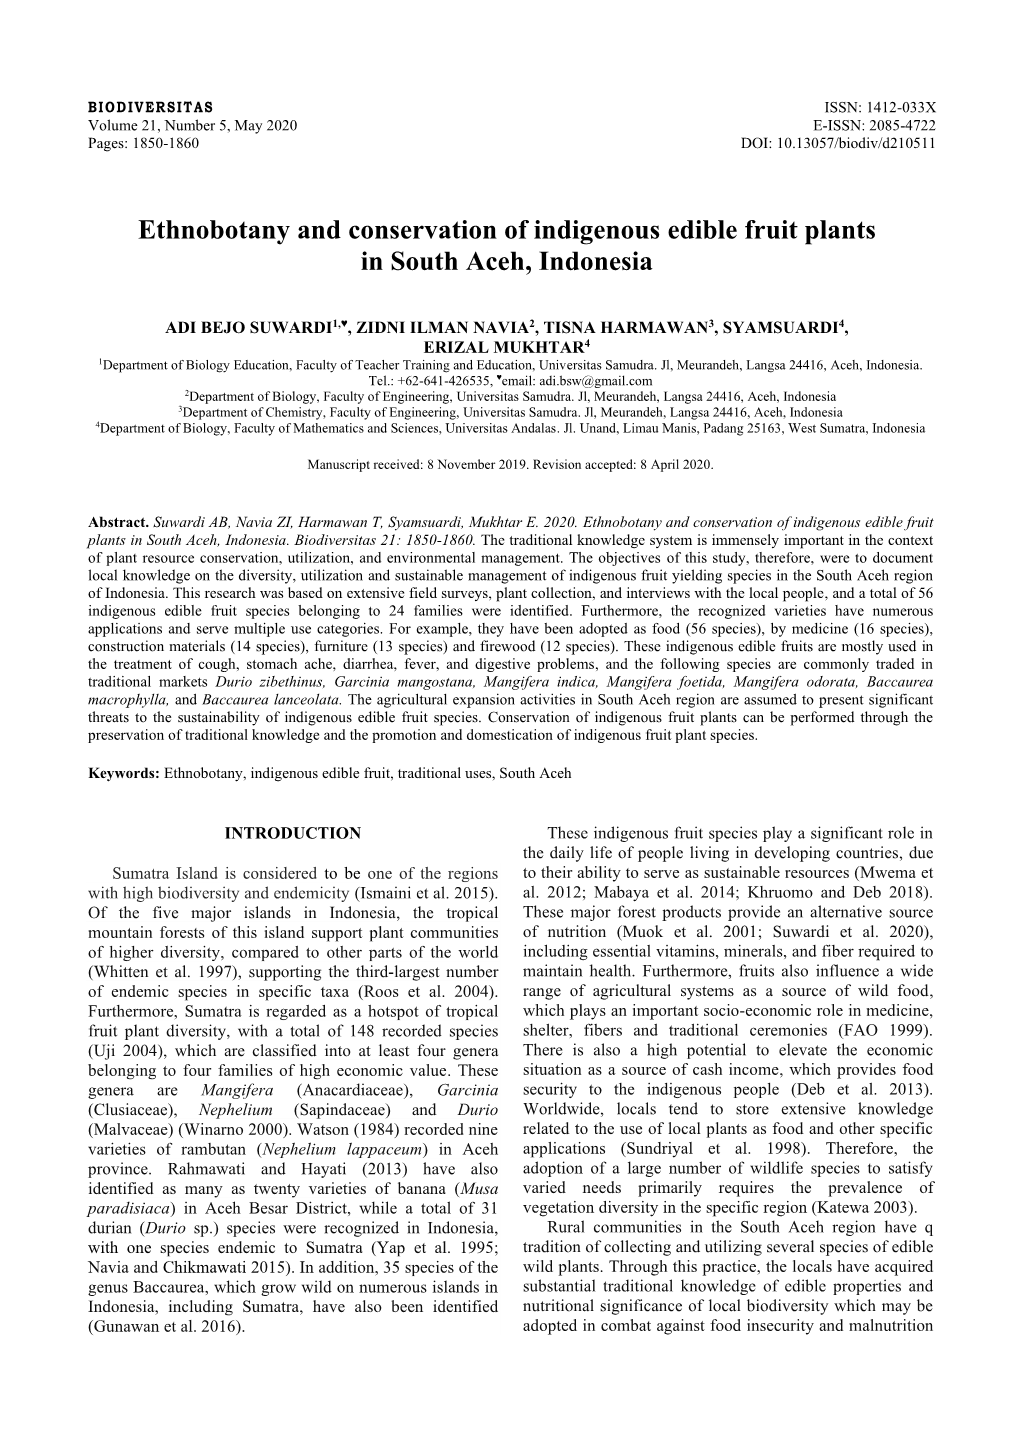 Ethnobotany and Conservation of Indigenous Edible Fruit Plants in South Aceh, Indonesia